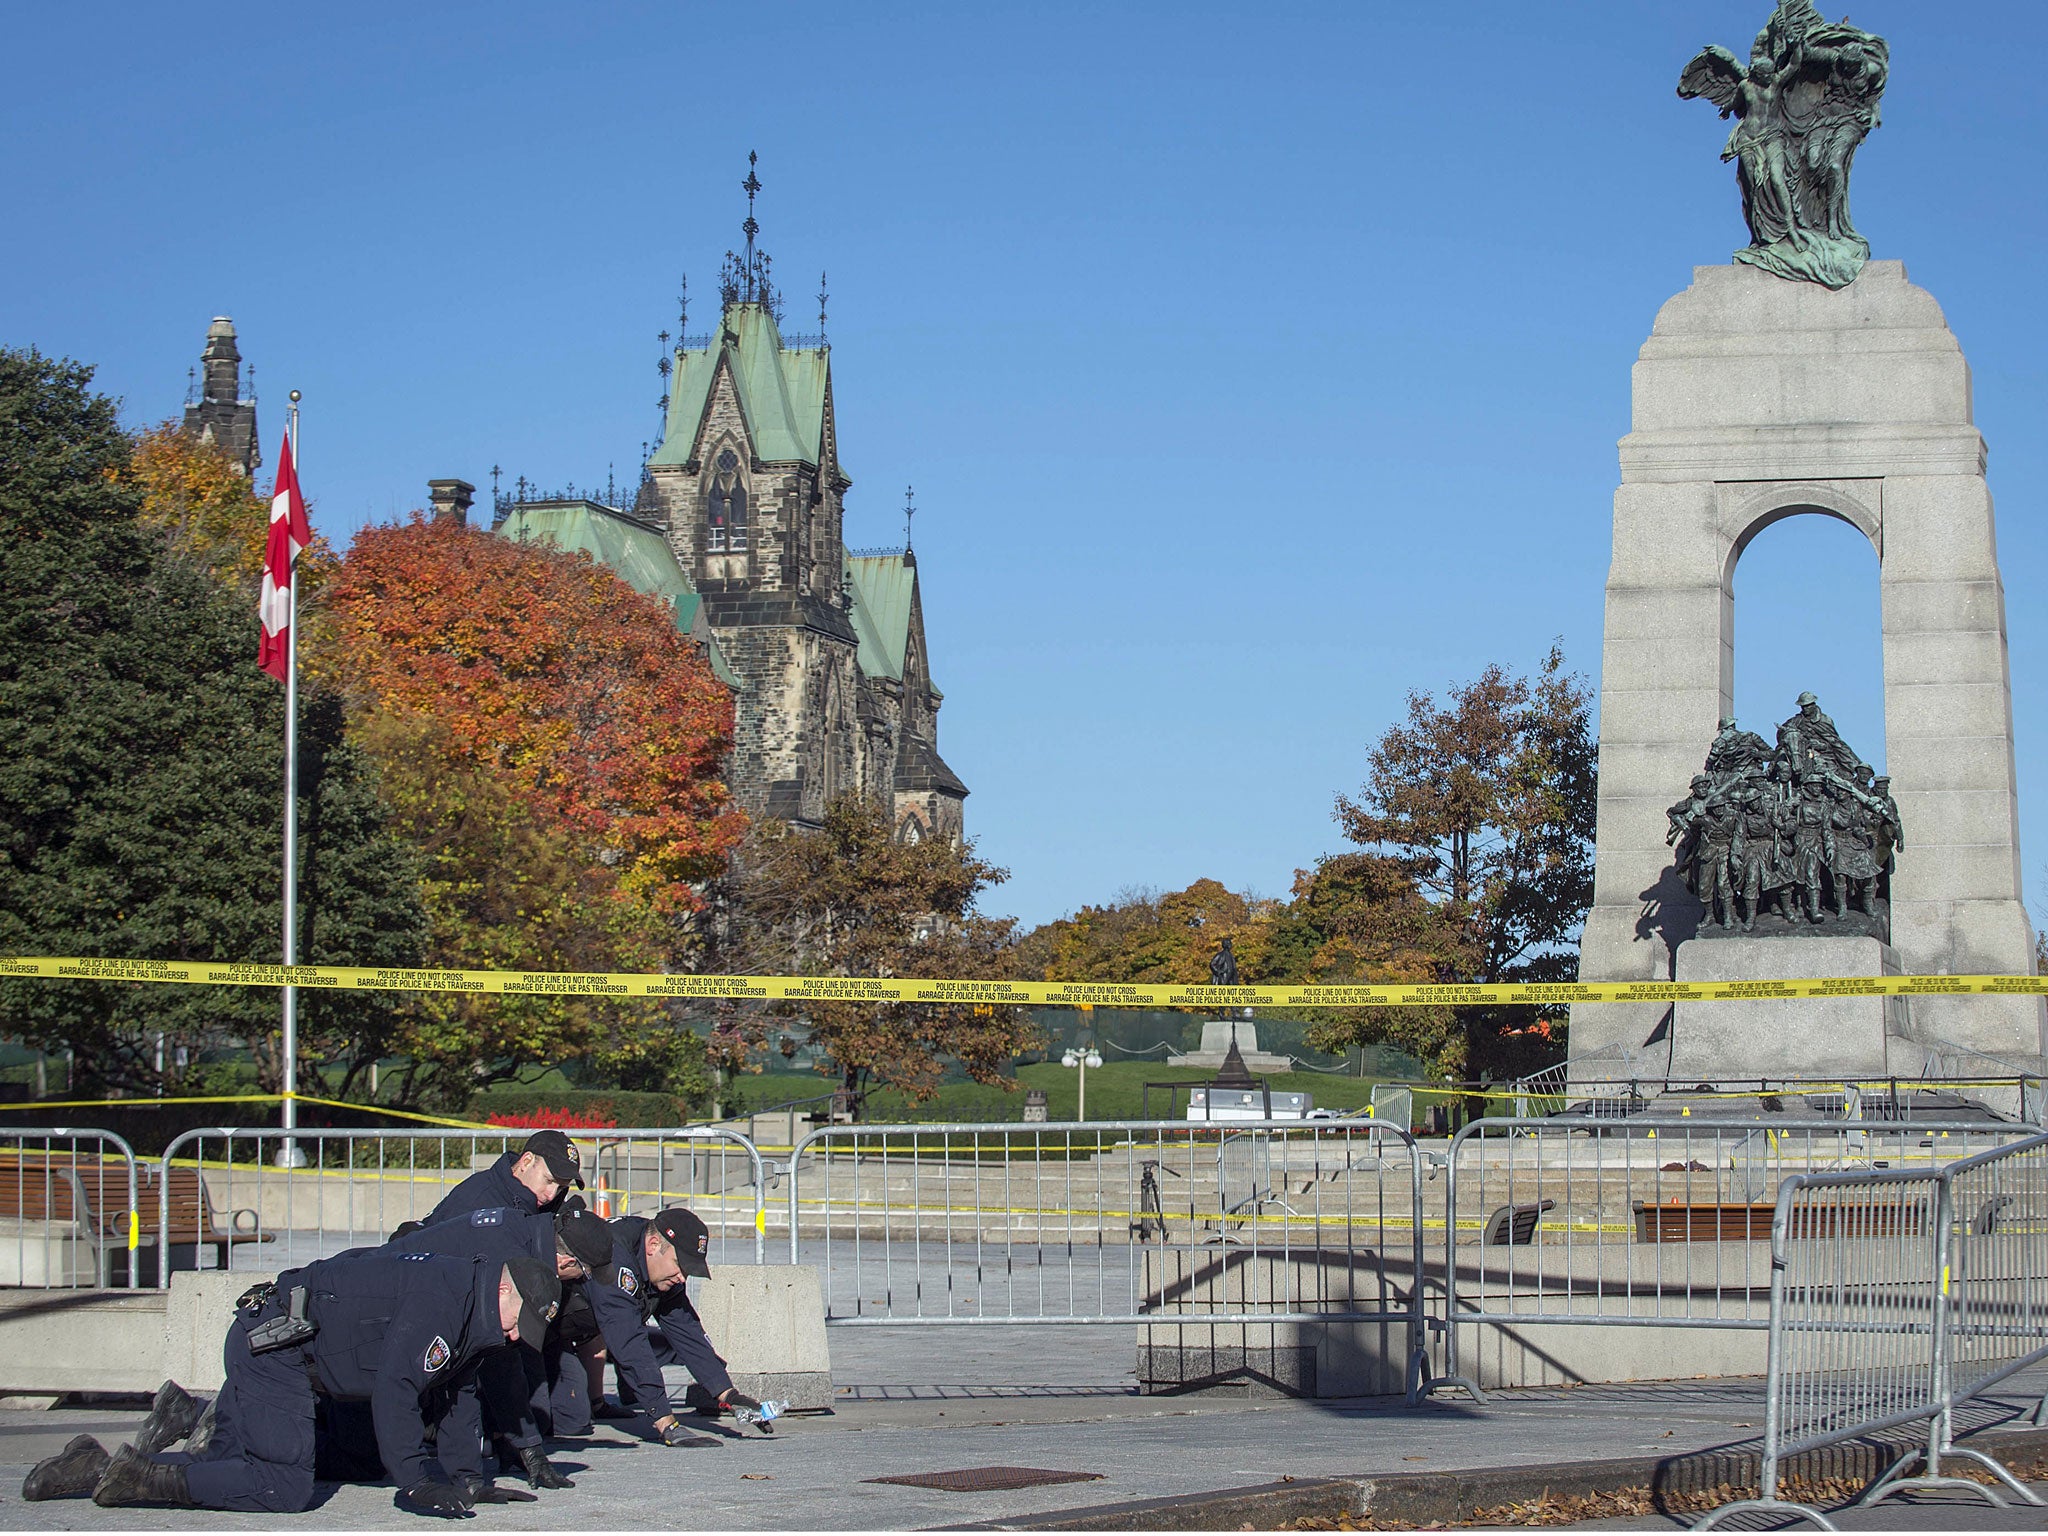 Police officers search the area in front of National War Memorial on October 23, 2014, in Ottawa.